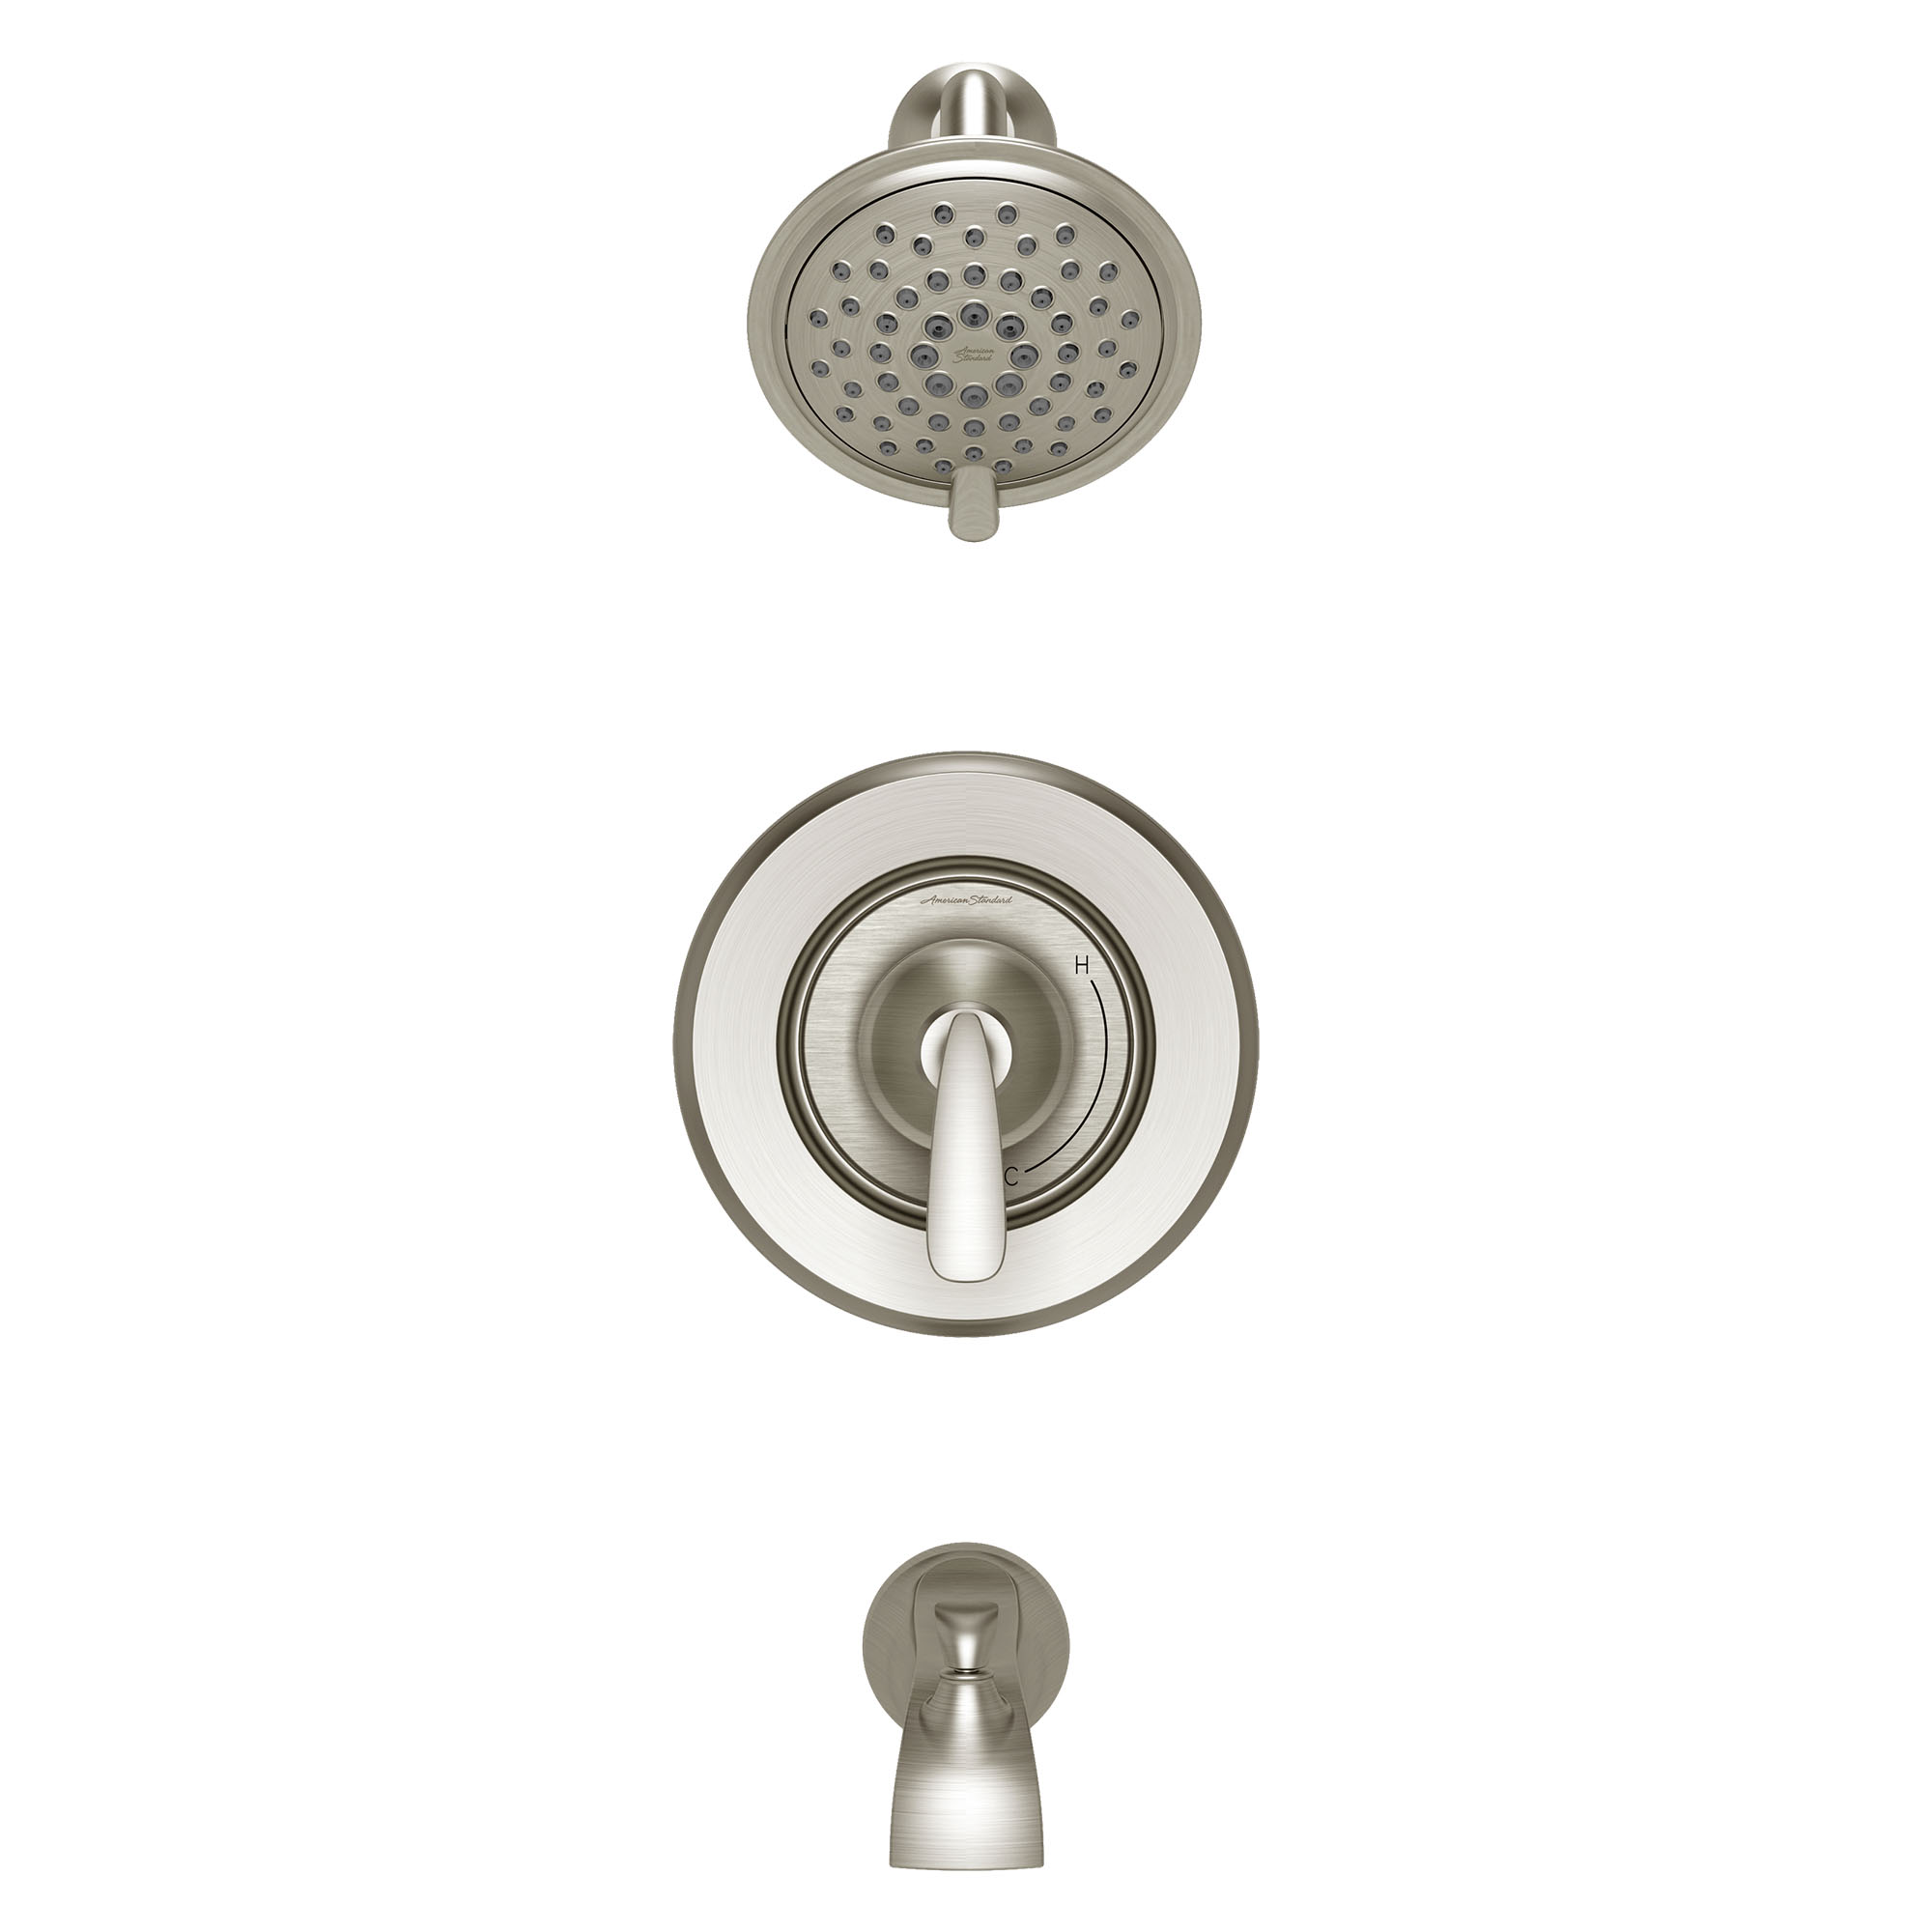 Somerville 1.8 GPM Tub and Shower Trim Kit with Ceramic Disc Valve Cartridge and Lever Handle